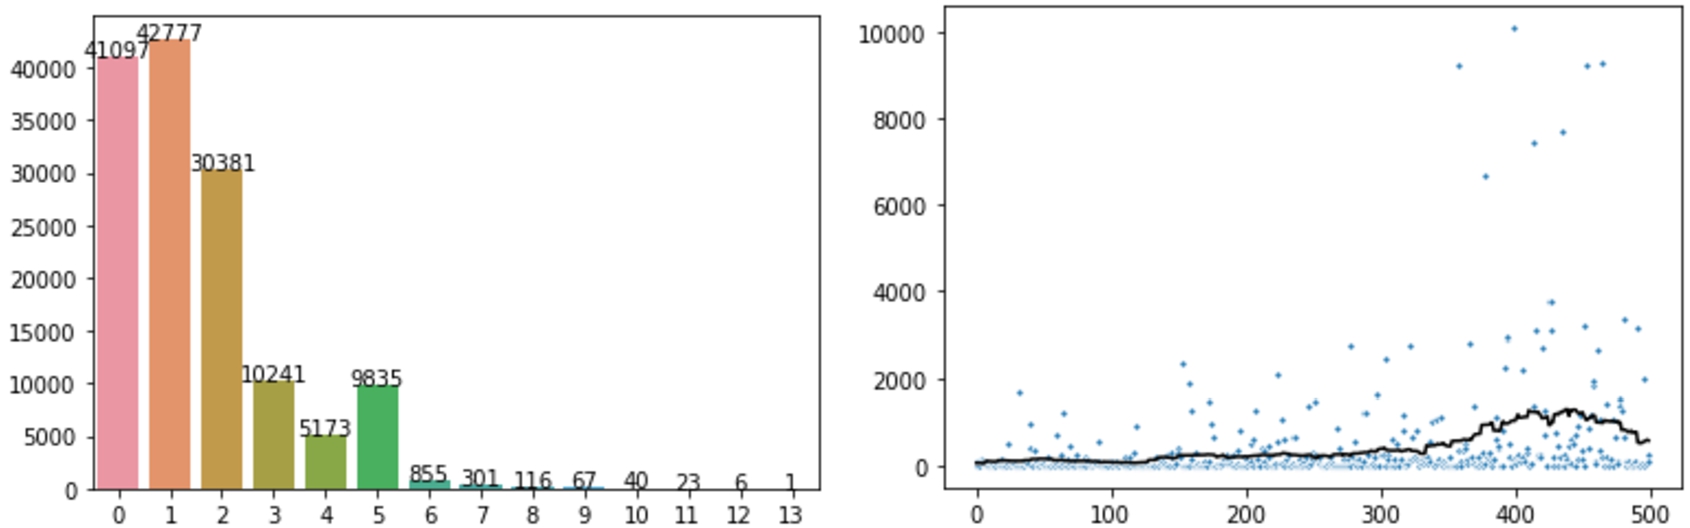 Left: Bar plot indicating how many molecules were assigned a particular number of class predictions, for example the bar at 0 indicates that 41,097 molecules were assigned no class prediction. (right) Scatter plot indicating the number of molecules predicted to belong to each of the 500 ChEBI classes in the prediction task (ordered), with the rolling average indicated by a line.